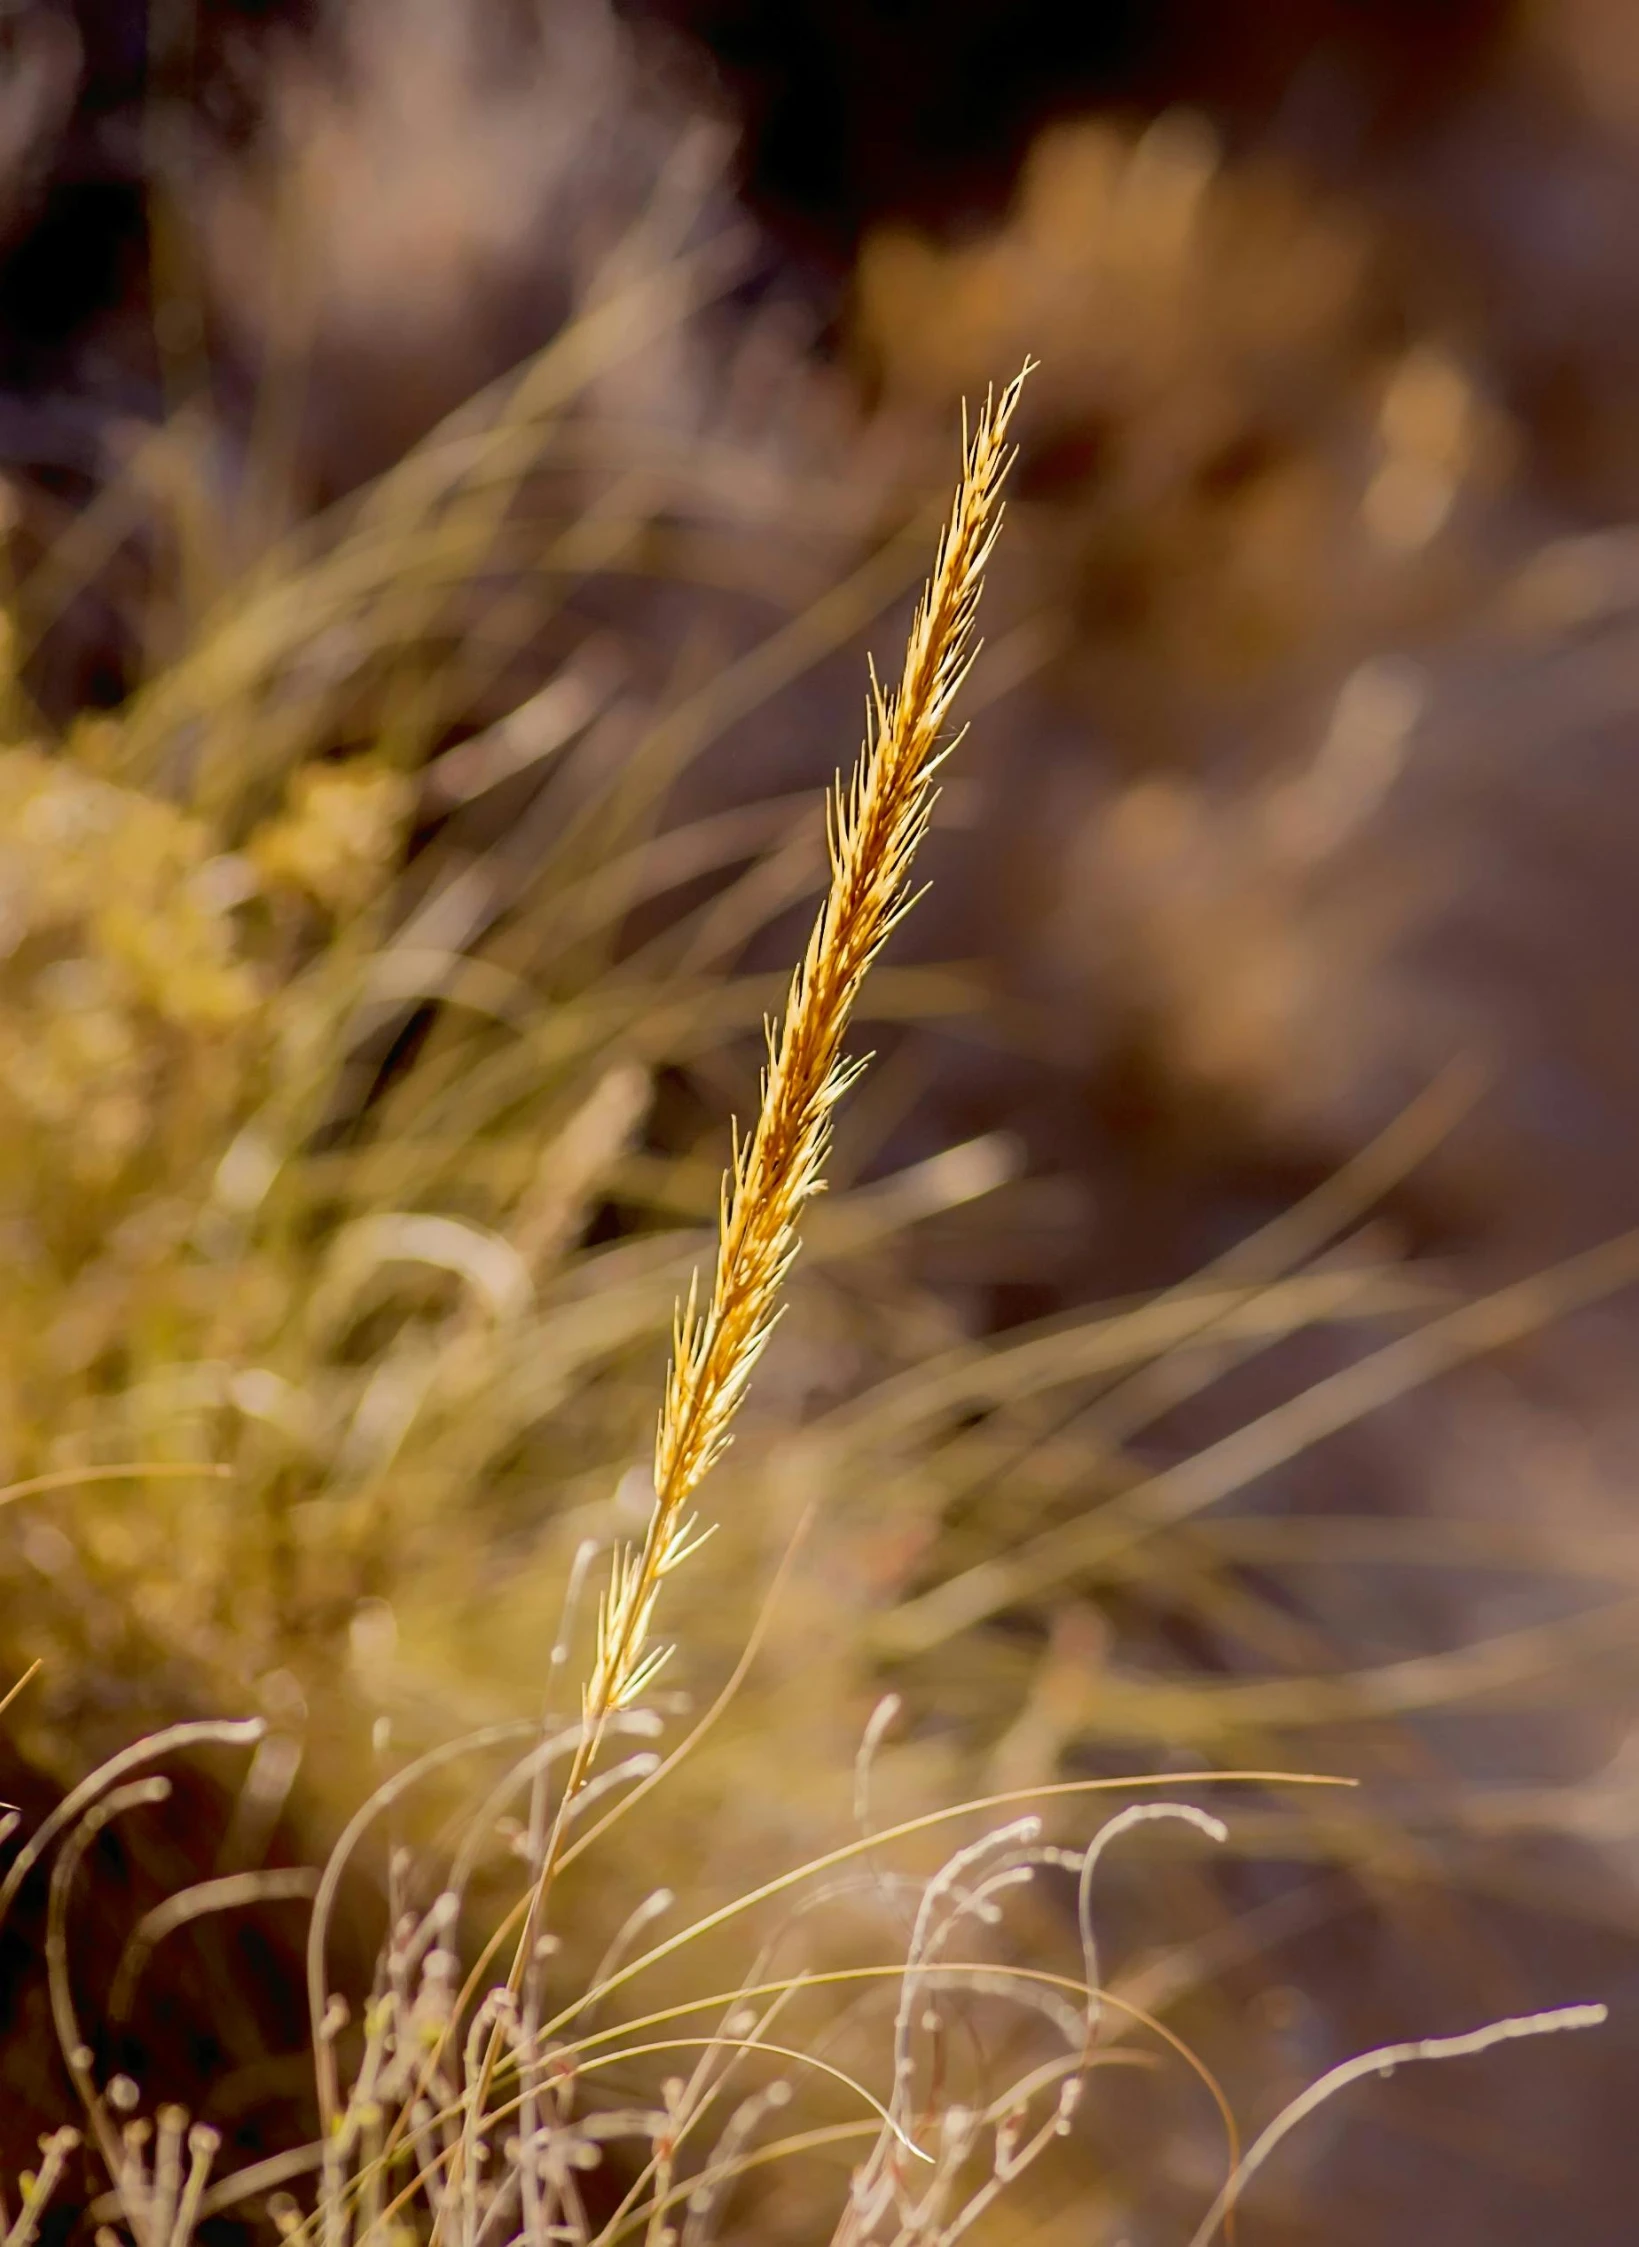 a close up of a plant with a blurry background, golden grasslands, cinestill 800t 50mm eastmancolor, large tall, hair